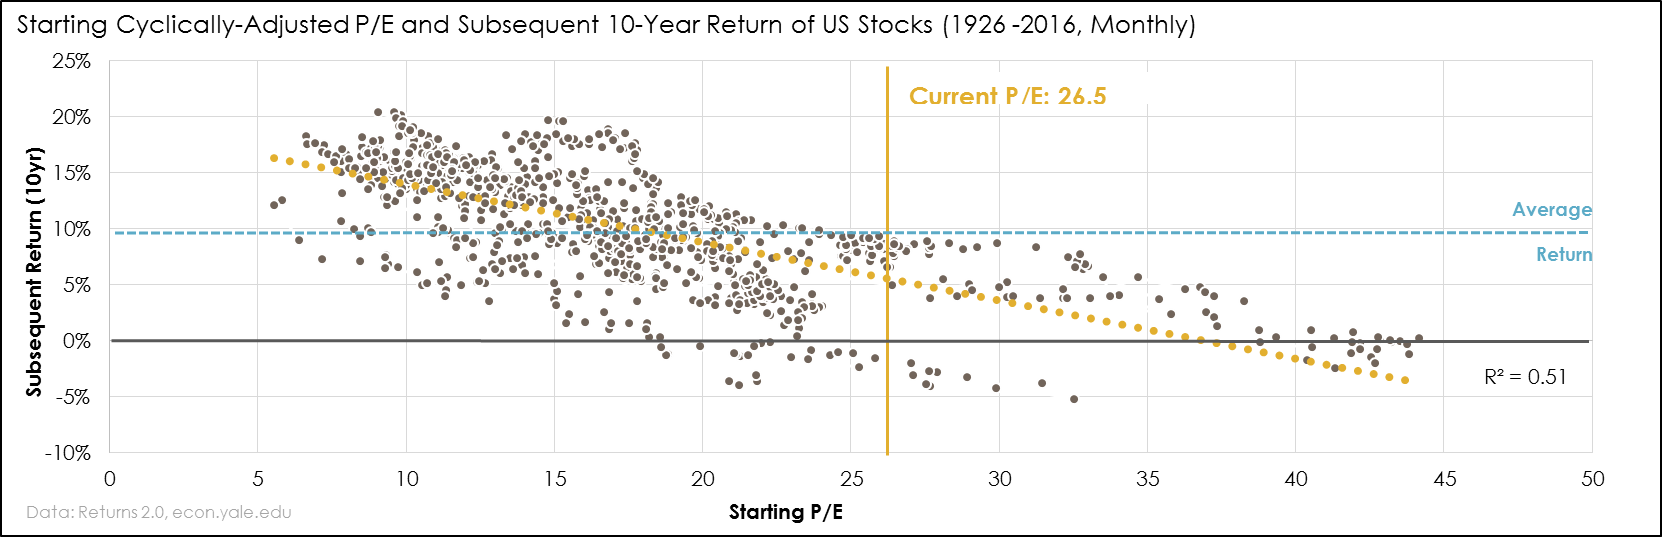 starting cyclically adjusted p/e and subsequent 10 year return